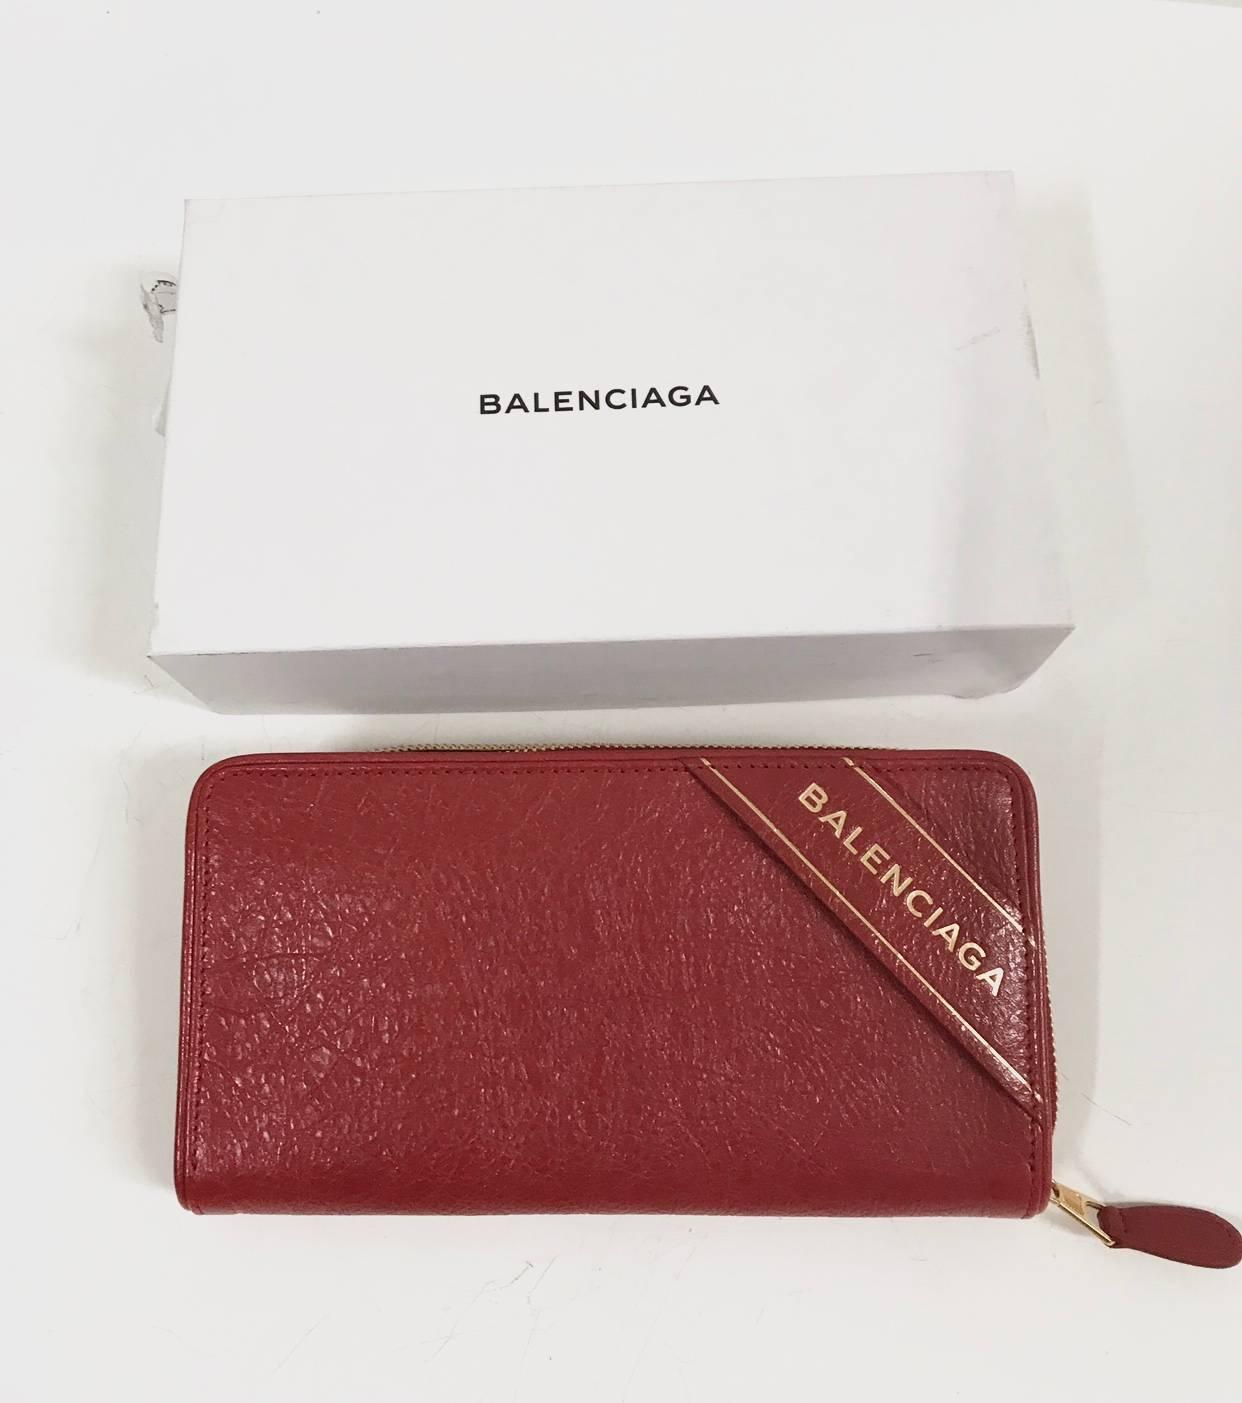 Balenciaga Wallet in Red Leather 2017 In New Condition For Sale In Lombardia, IT